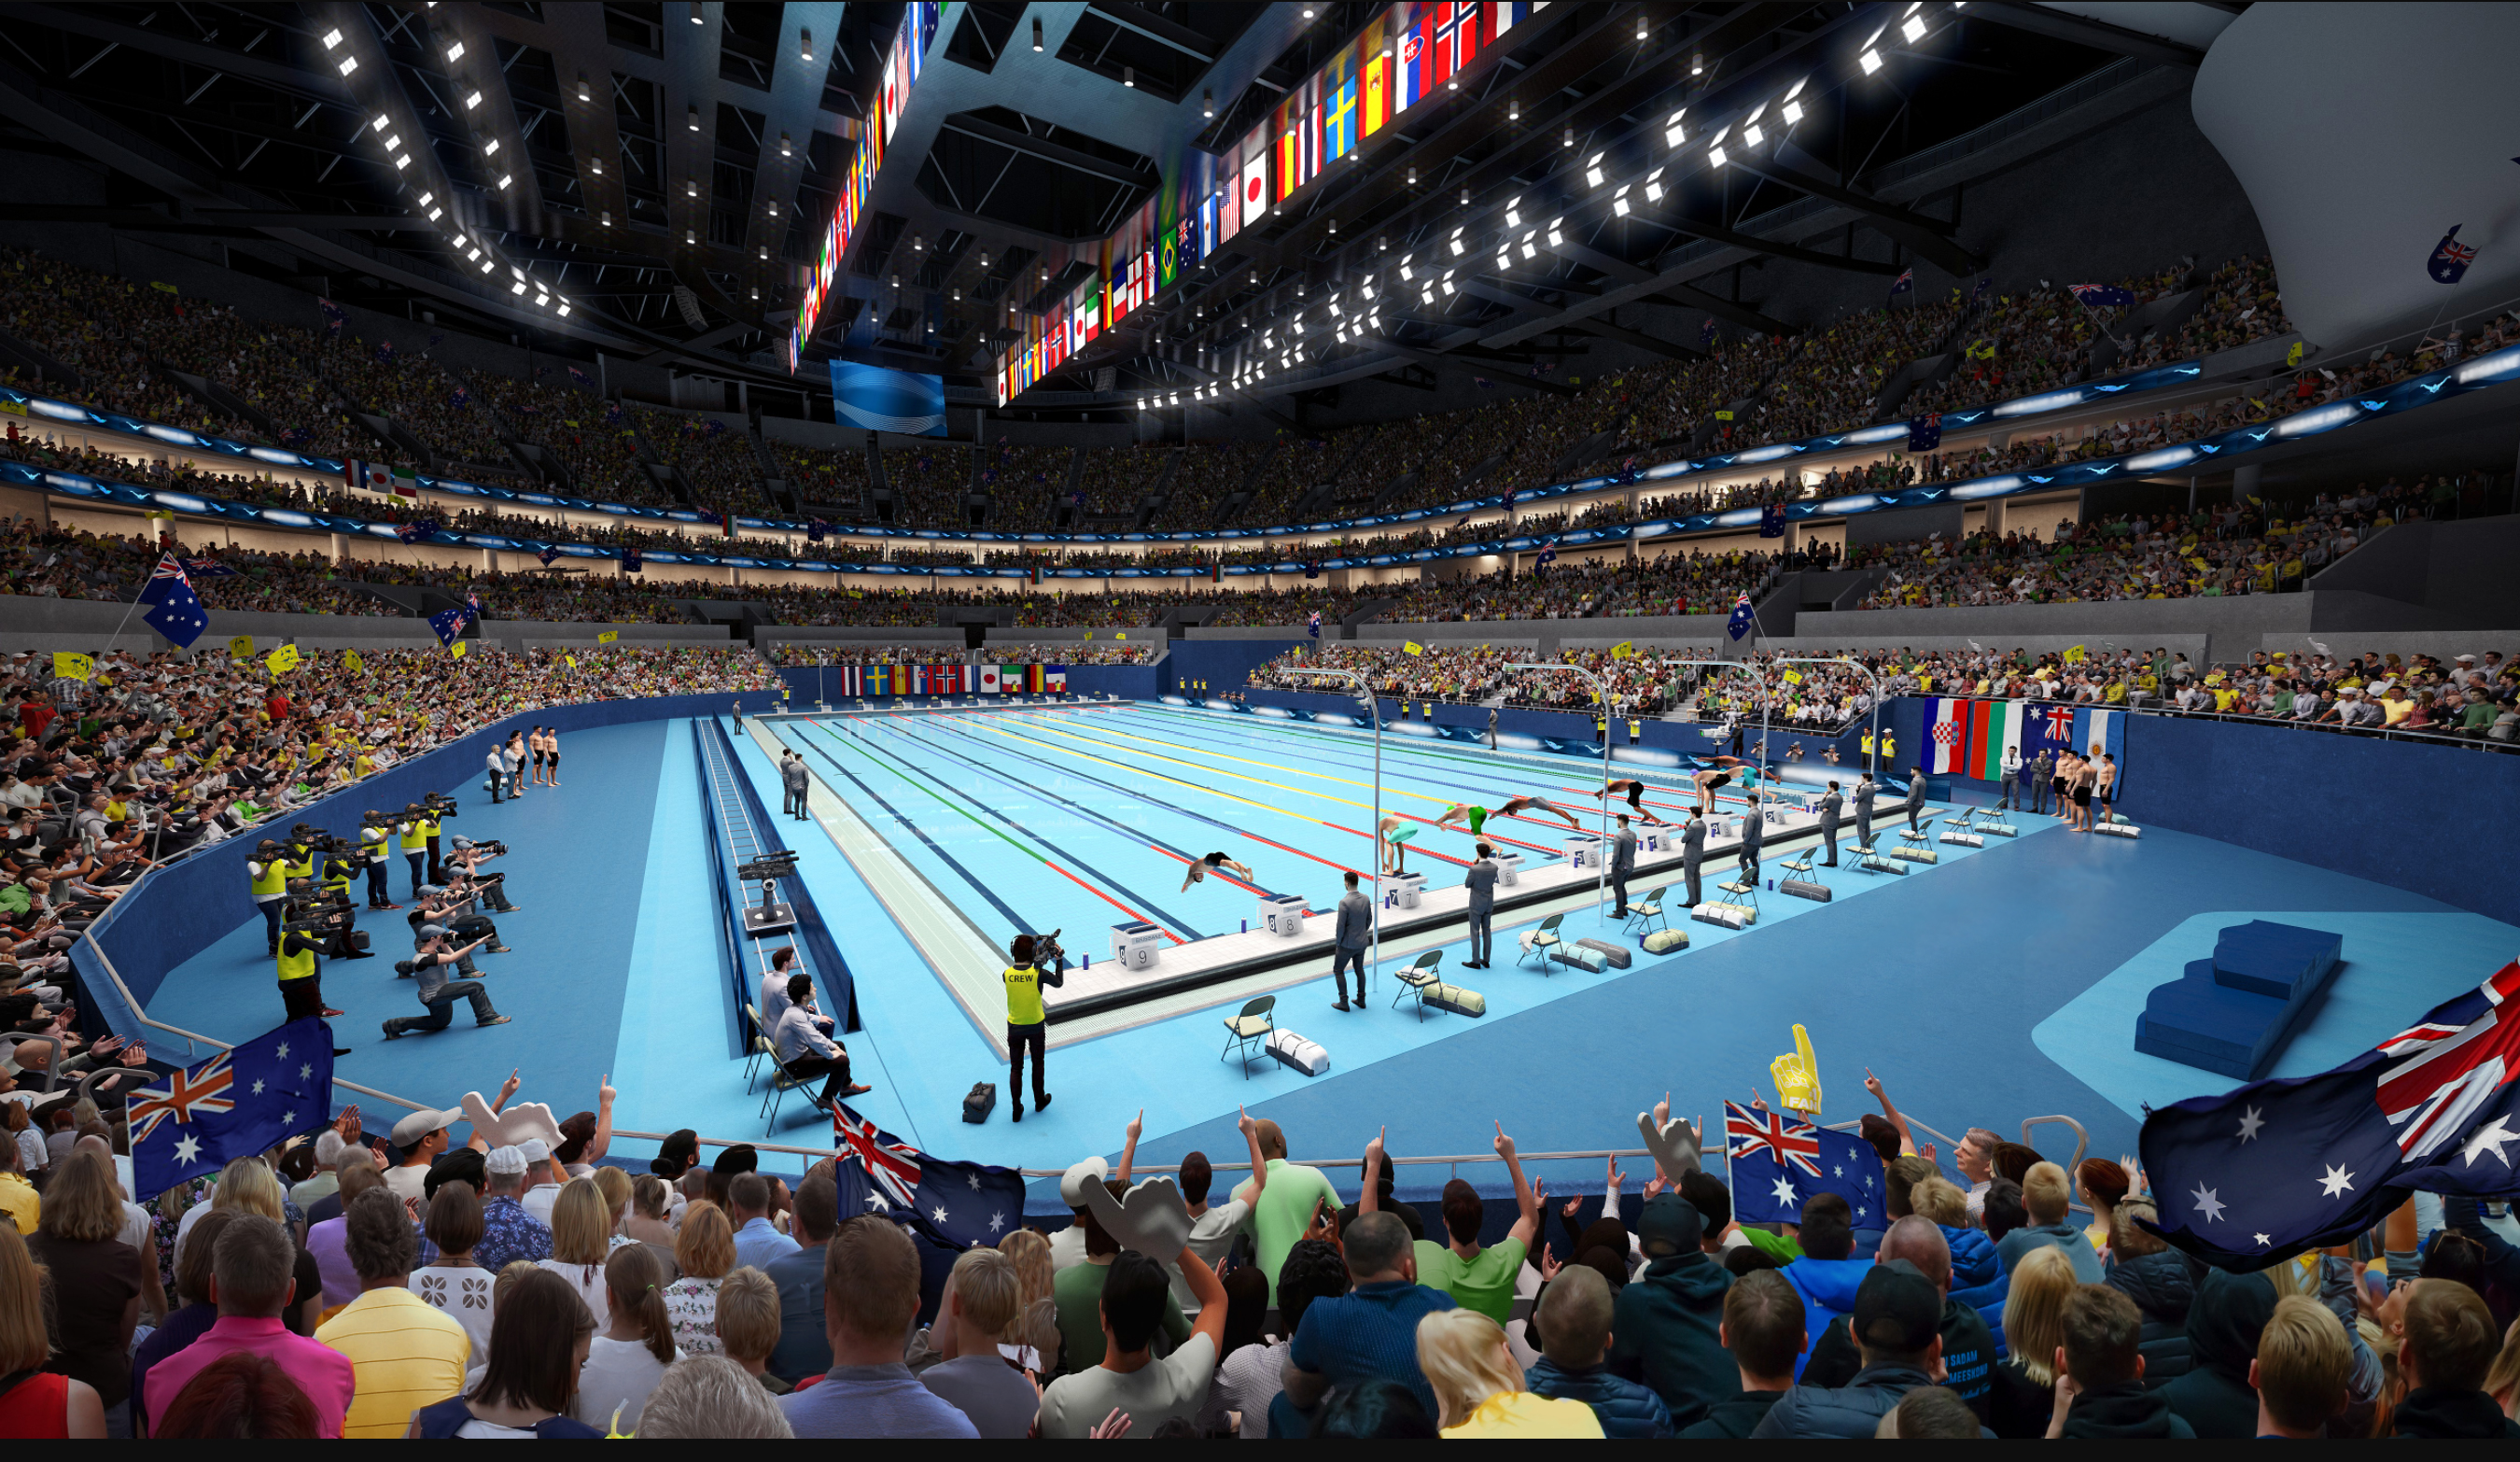 Swimming Australia calls for new acquatics centre to be legacy of Brisbane 2032 Olympic and Paralympic Games